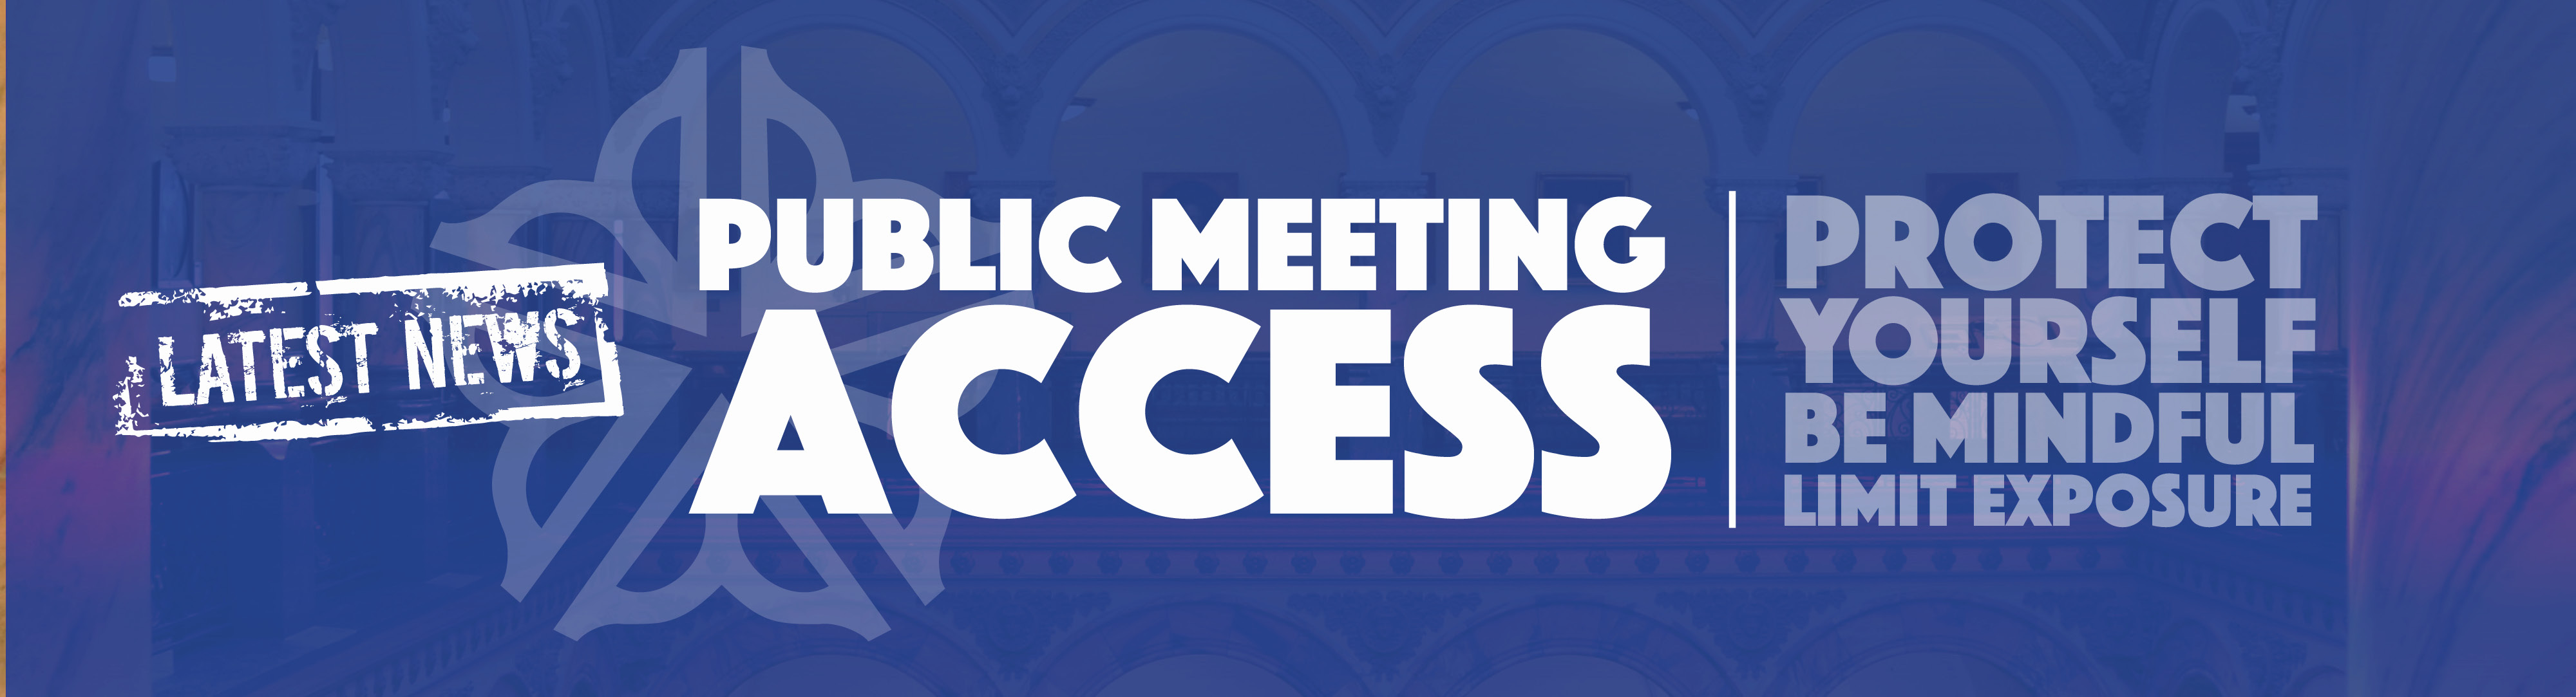 20 Public meeting page header